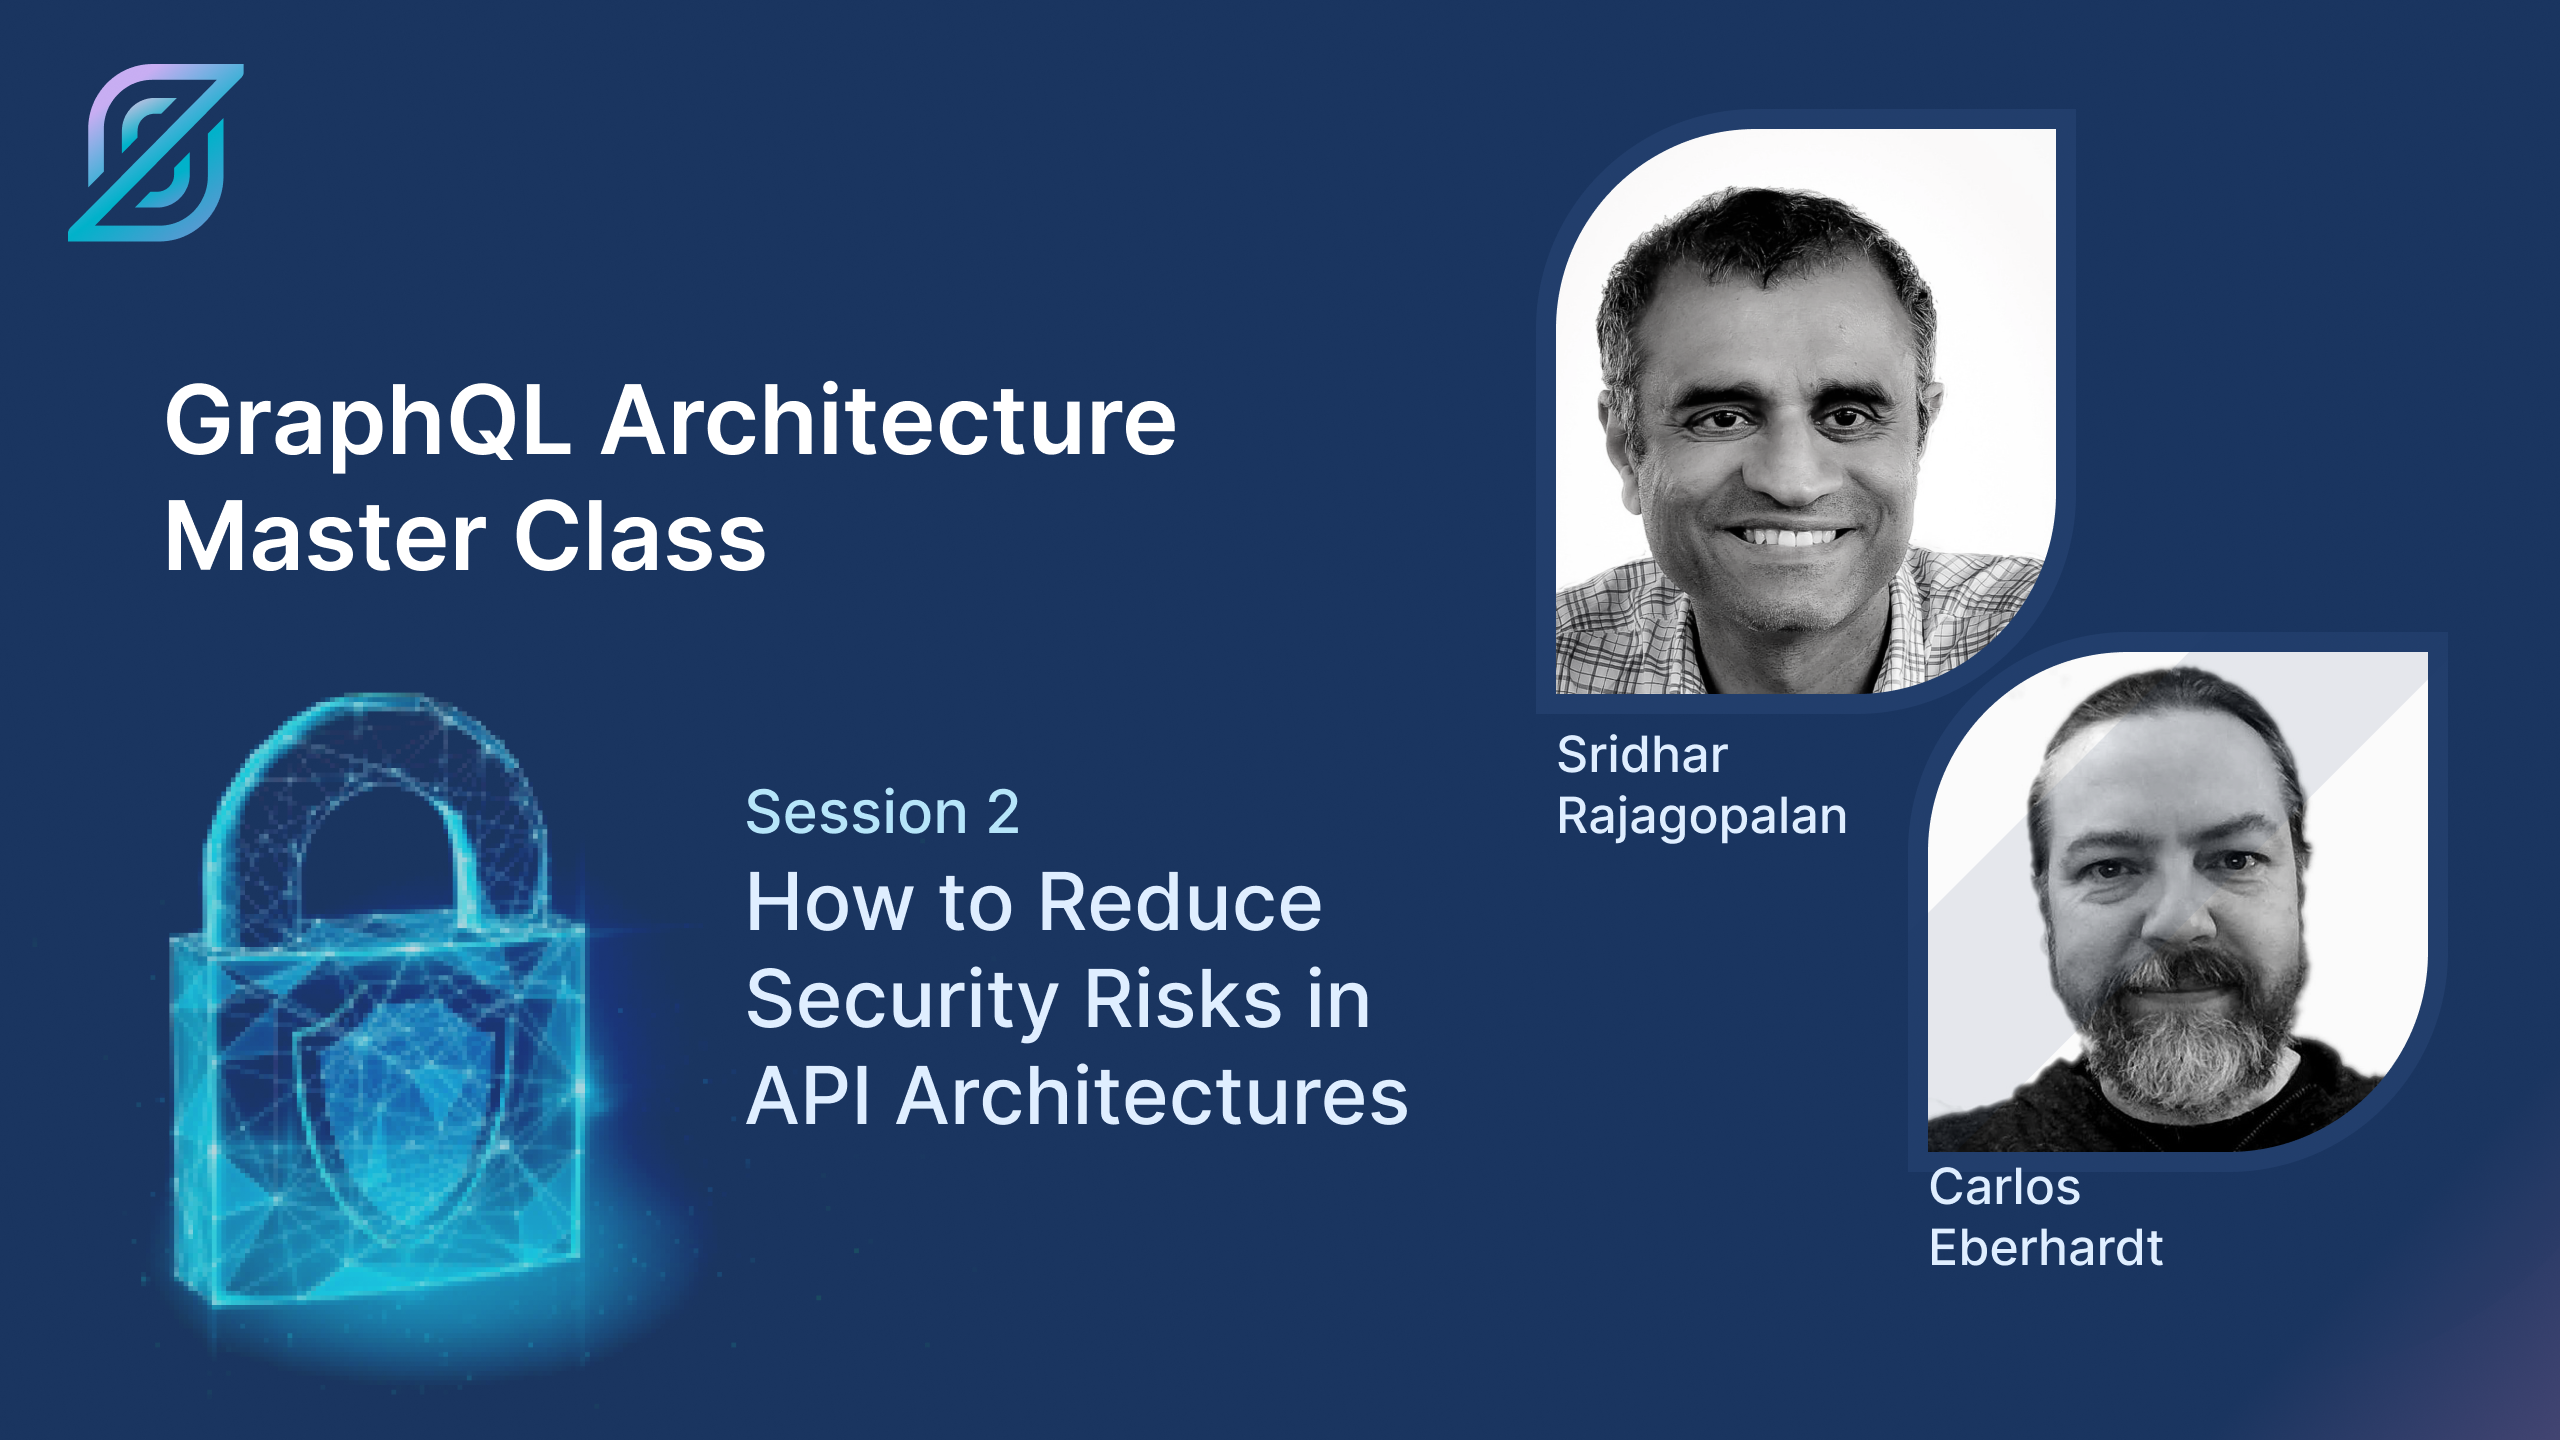 How to Reduce Security Risks in API Architectures: GraphQL Architecture Master Class